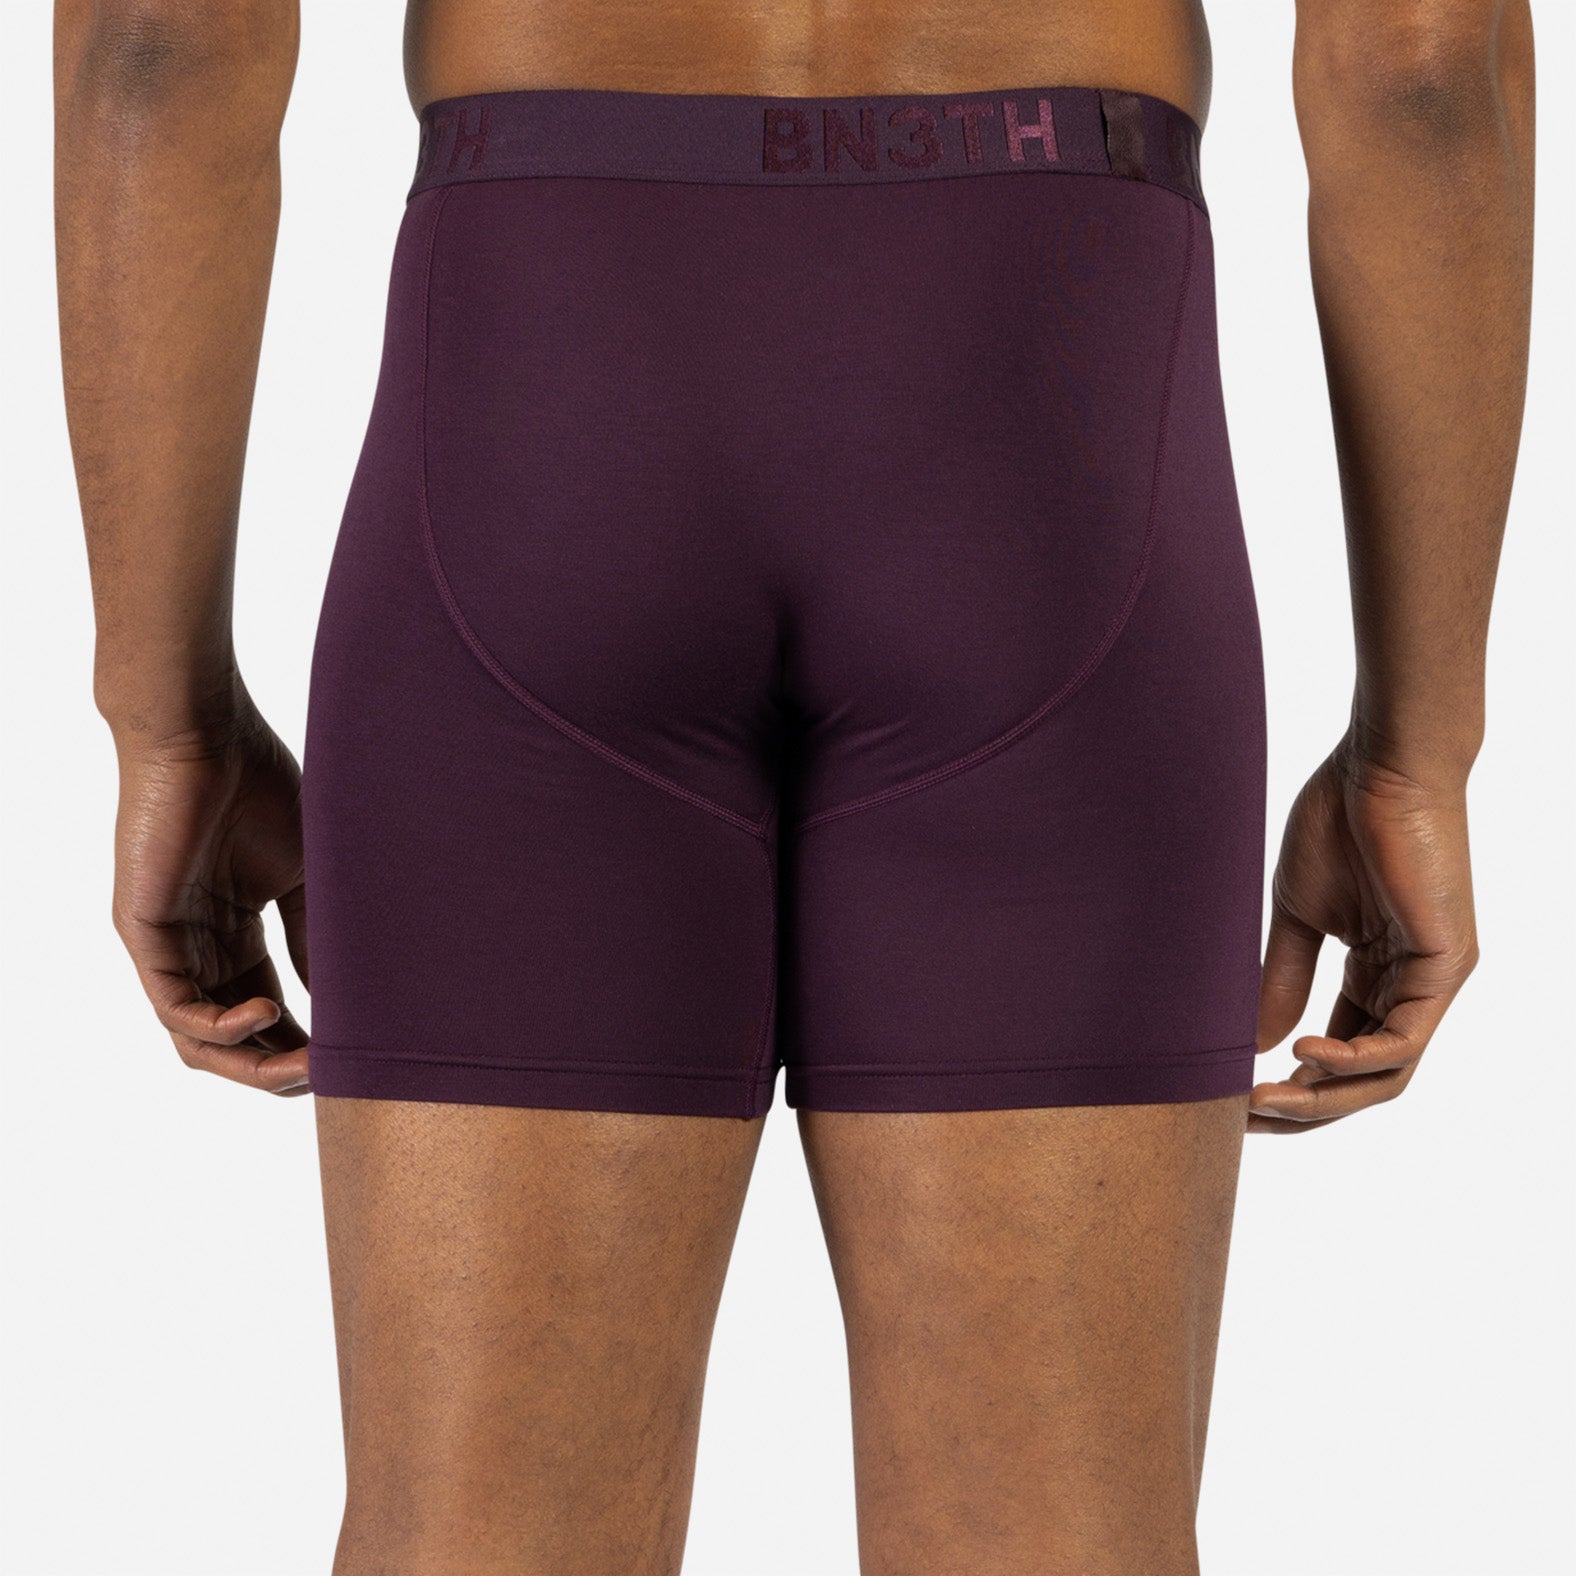 BN3TH Men's Solid Trunk - Breathable and Anti-Chafing Underwear